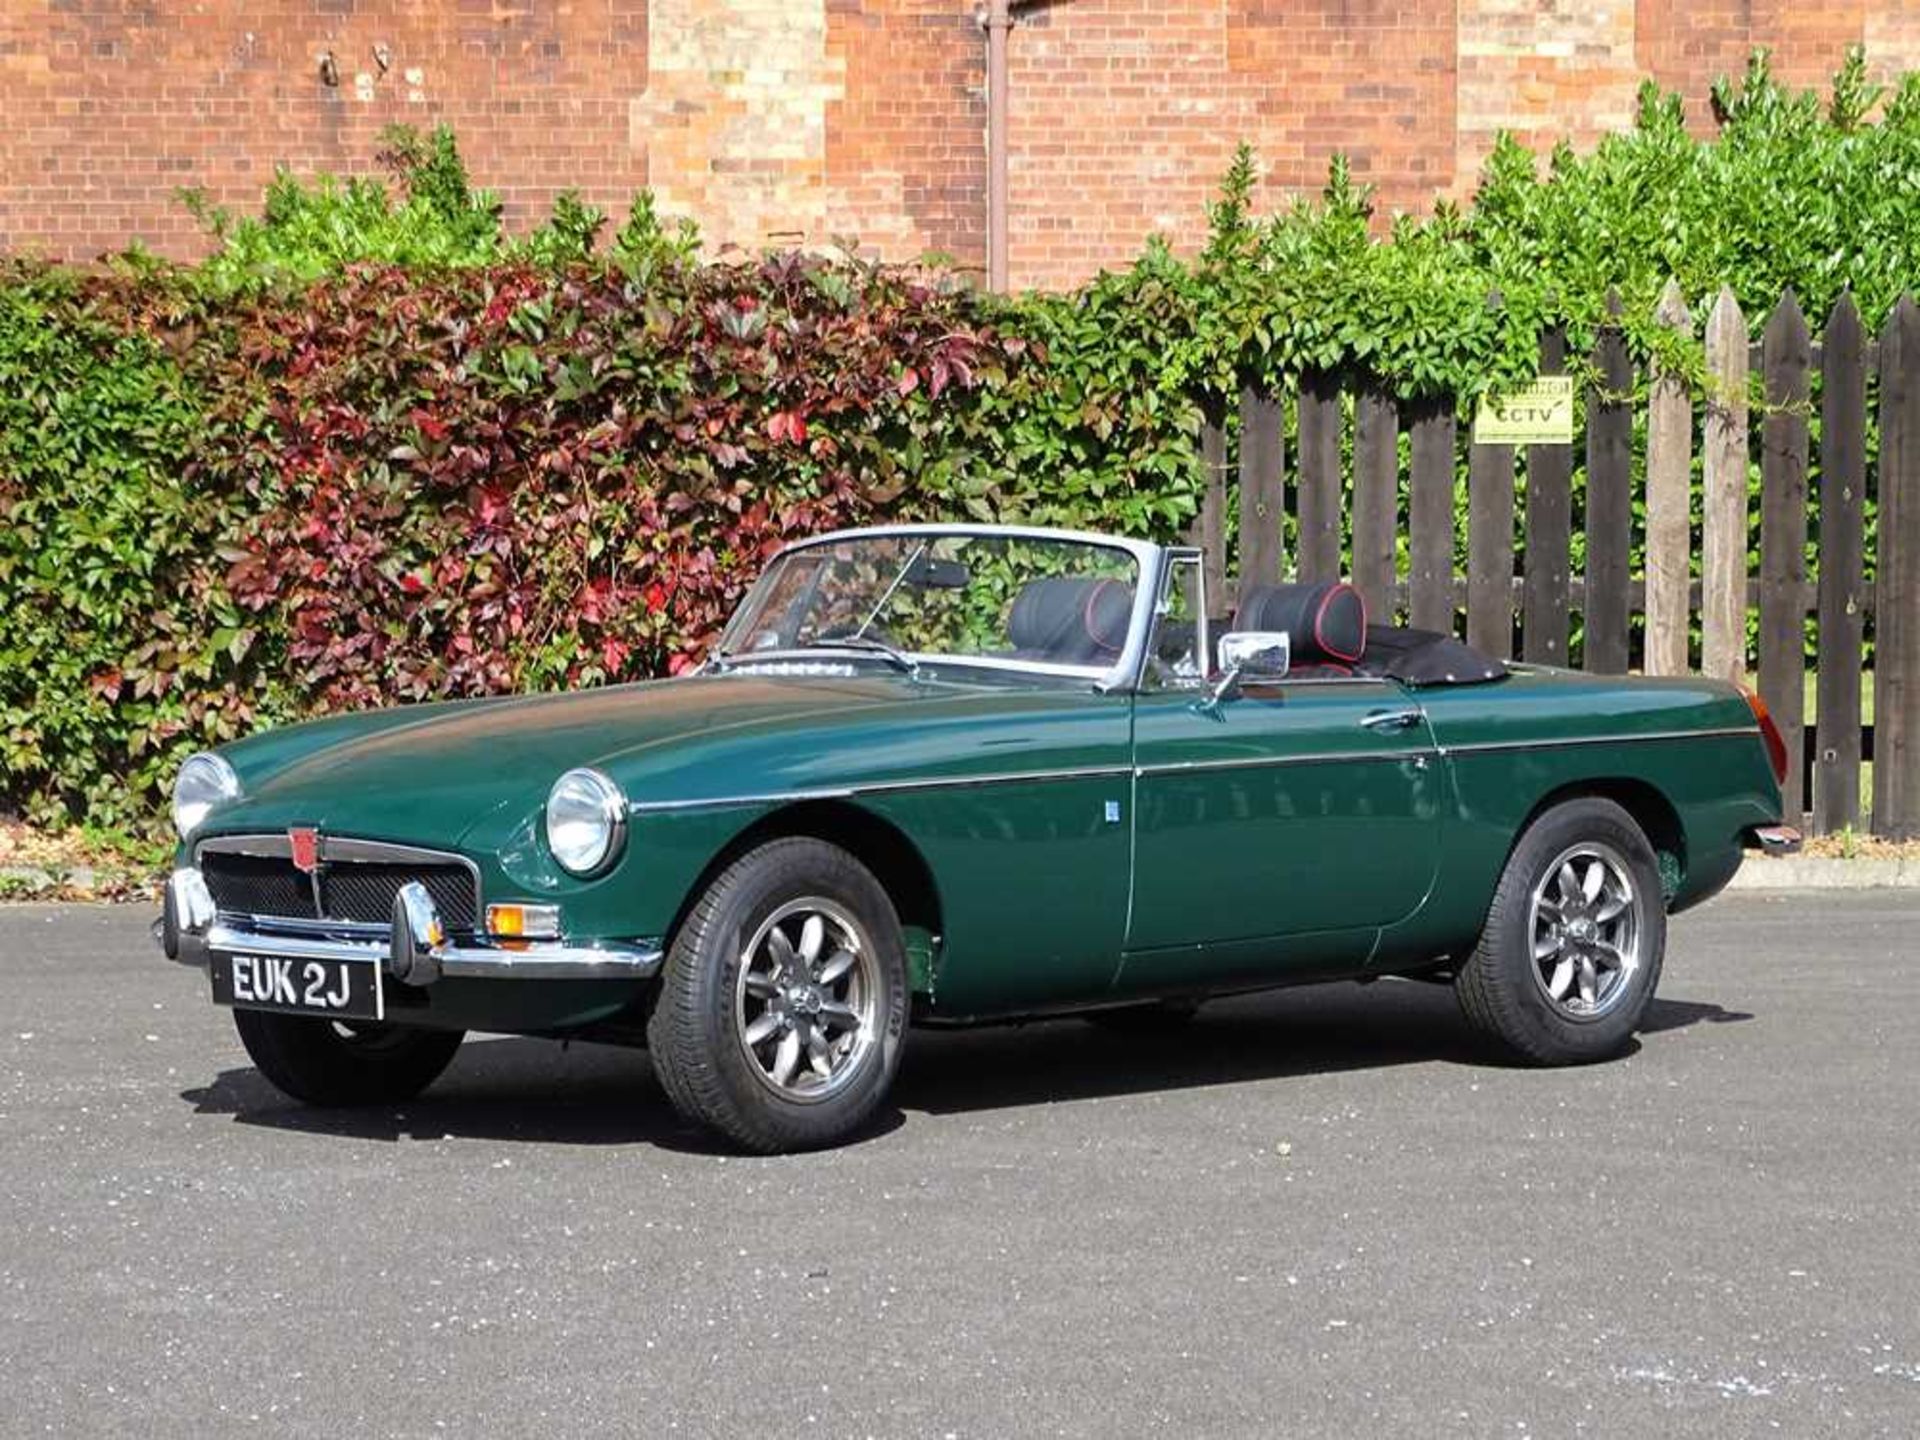 1971 MG B Roadster Restored at a cost of c.£33,000